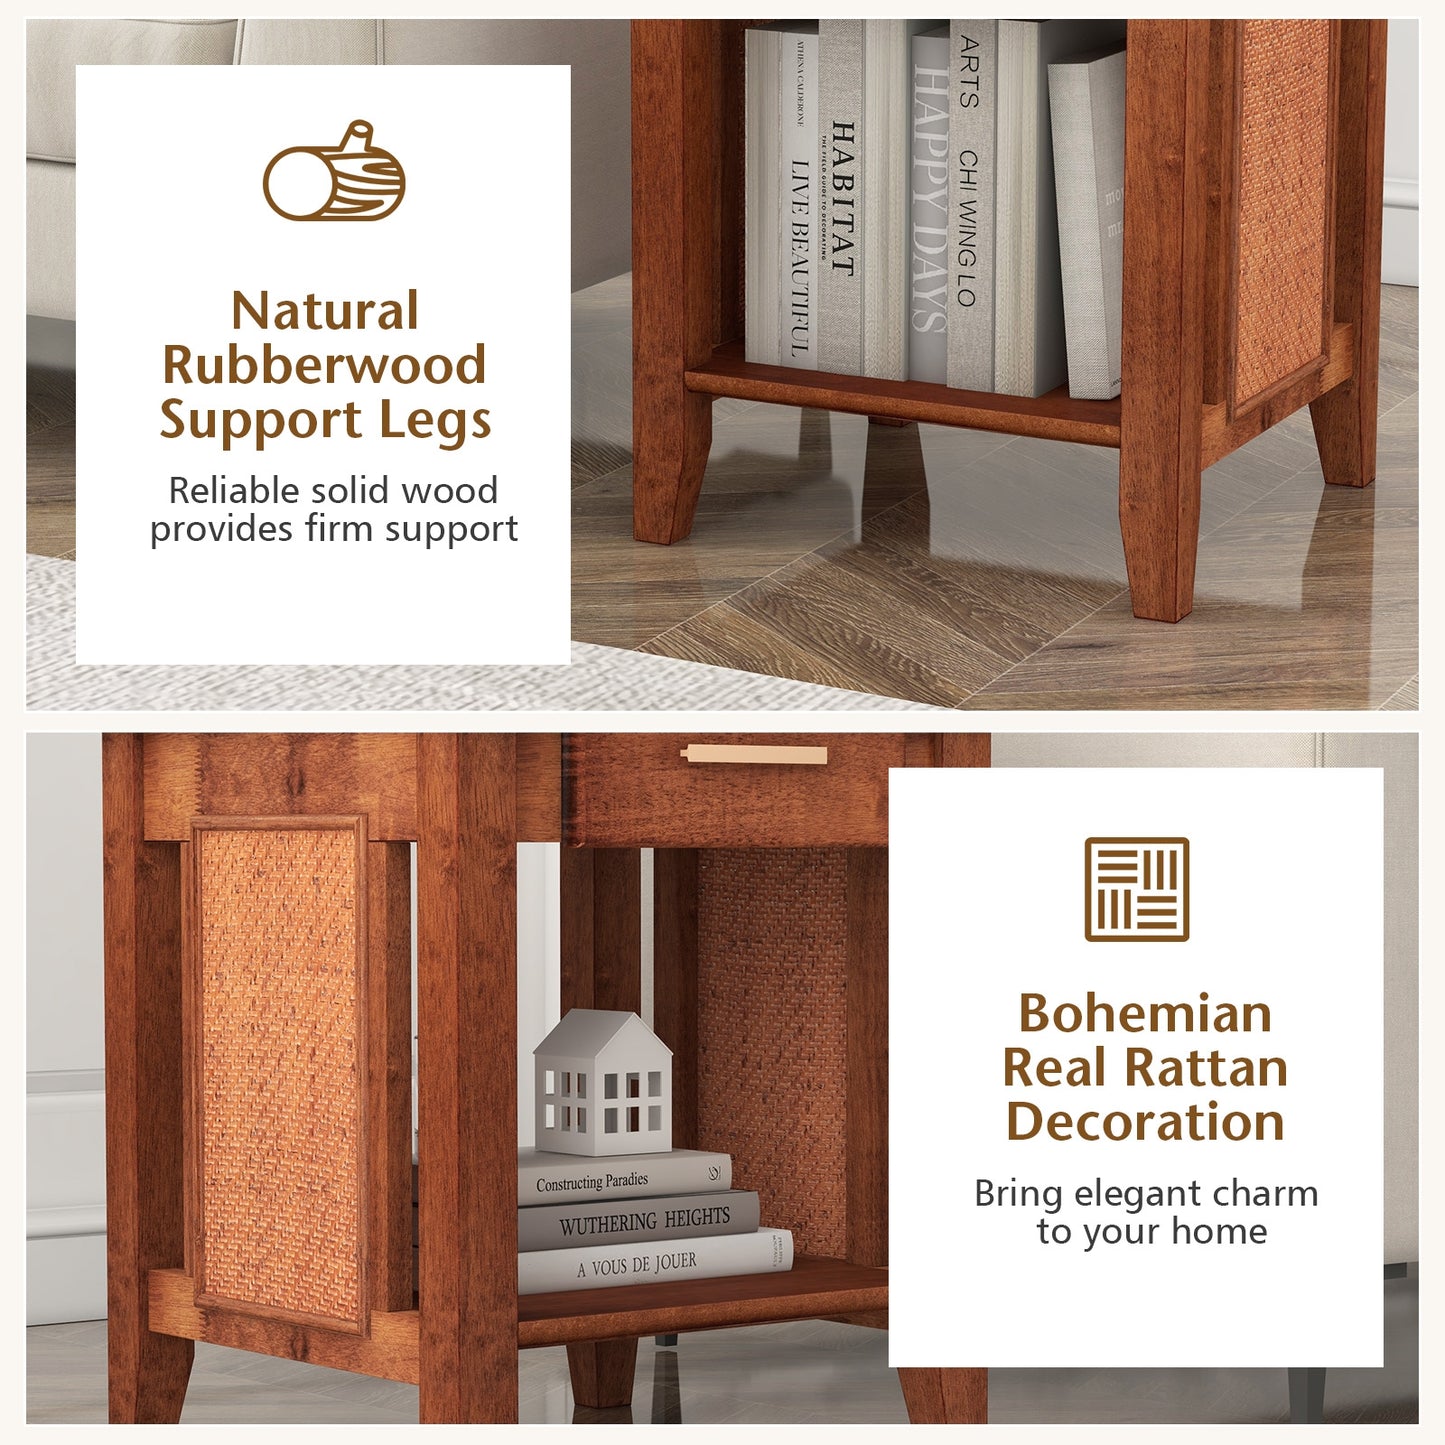 Rattan Nightstand End Table with Drawer and Storage Shelf-Walnut